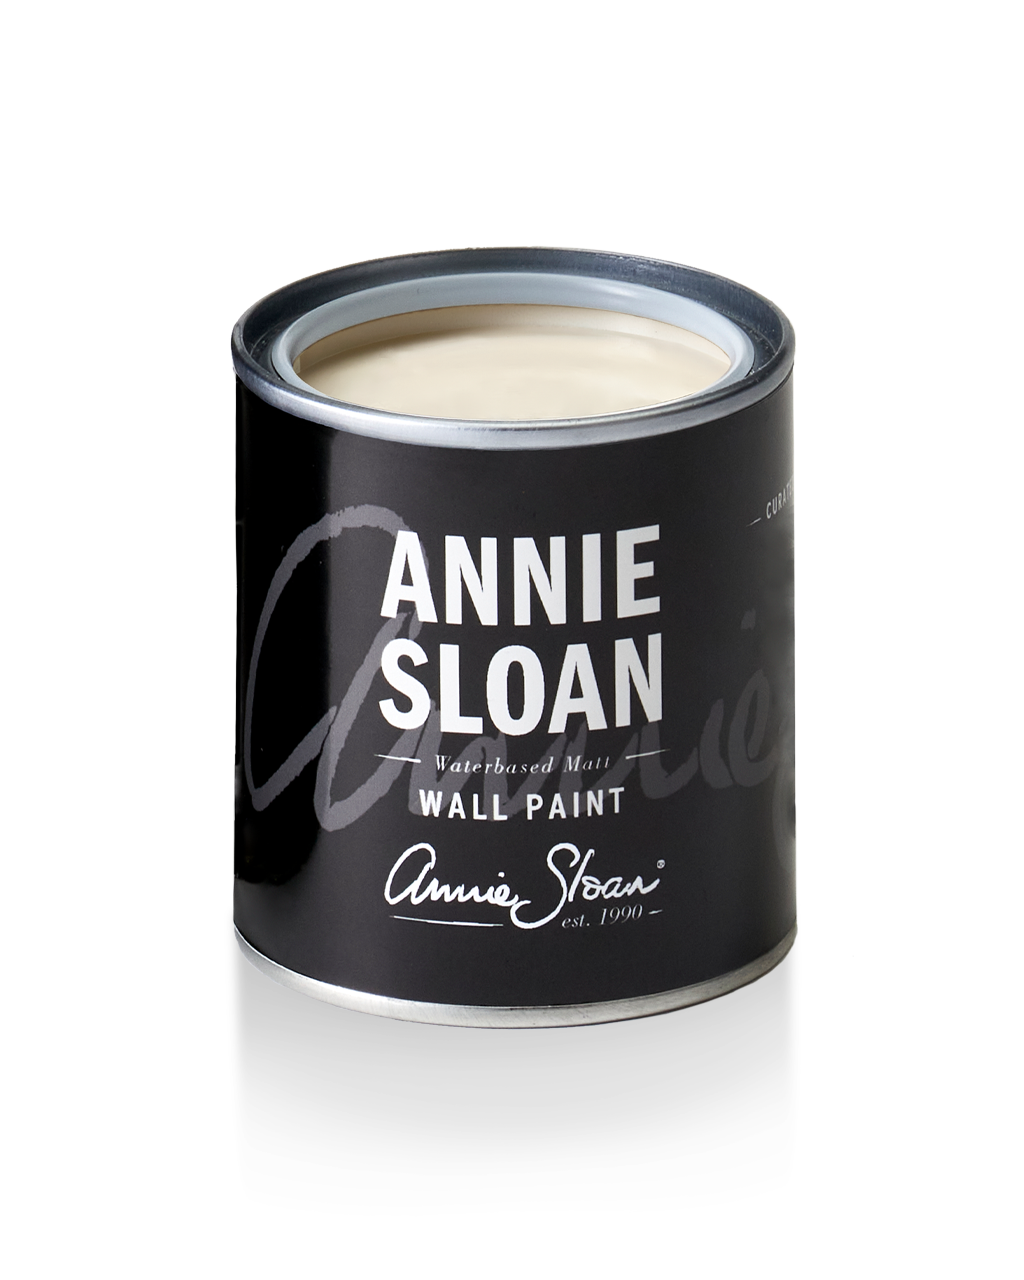 120ml of Old White Wall Paint by Annie Sloan